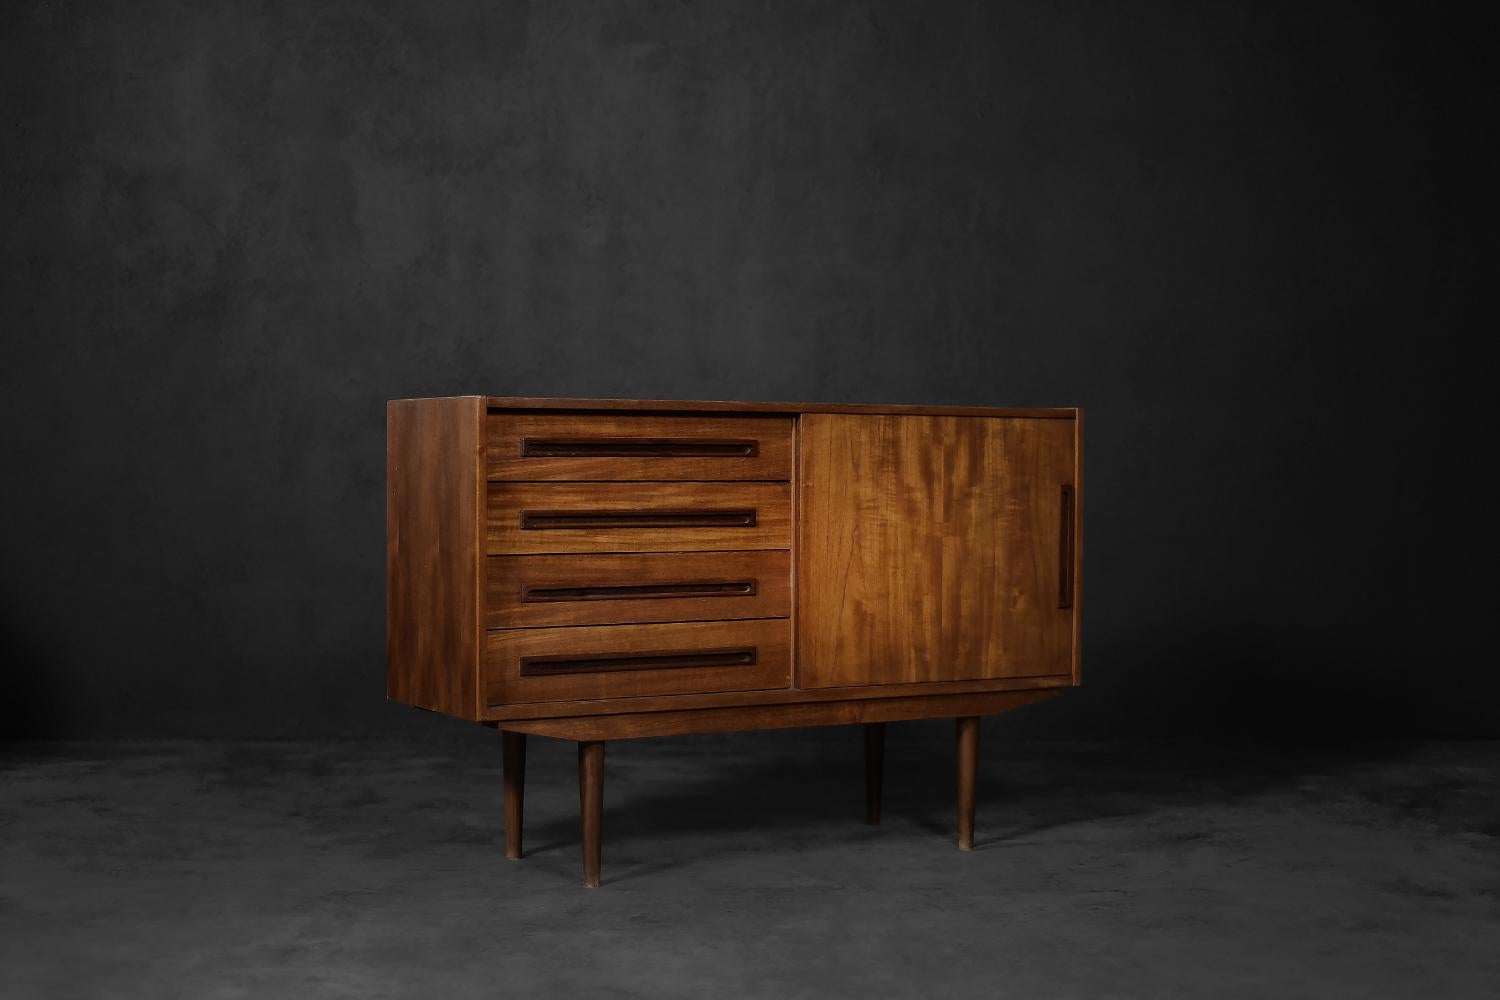 This classic chest of drawers was made in Denmark during the 1960s. It is finished with teak wood with regular grain and a warm, brown color. The chest of drawers has four wide drawers. Long, wooden handles are a perfect complement to them. The